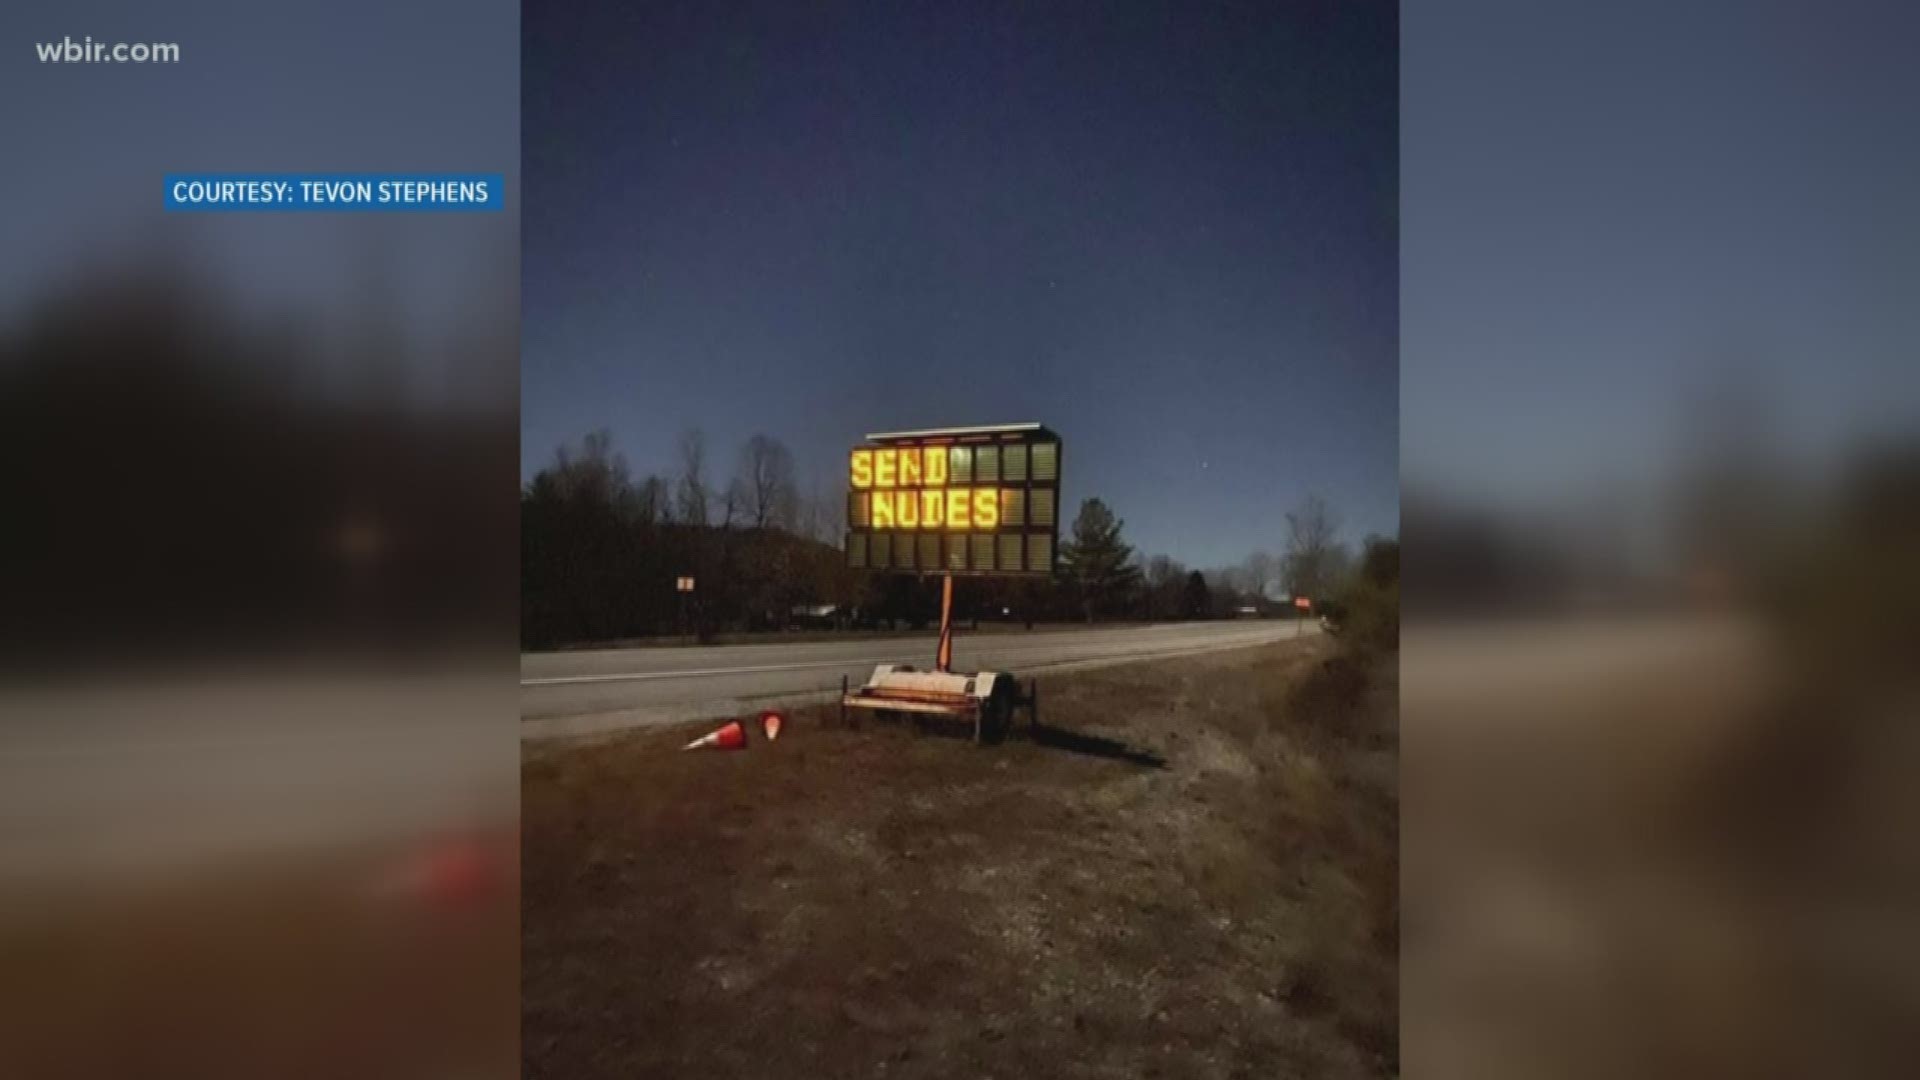 An eye-catching but inappropriate message forced a Kentucky road contractor to turn-off a sign.